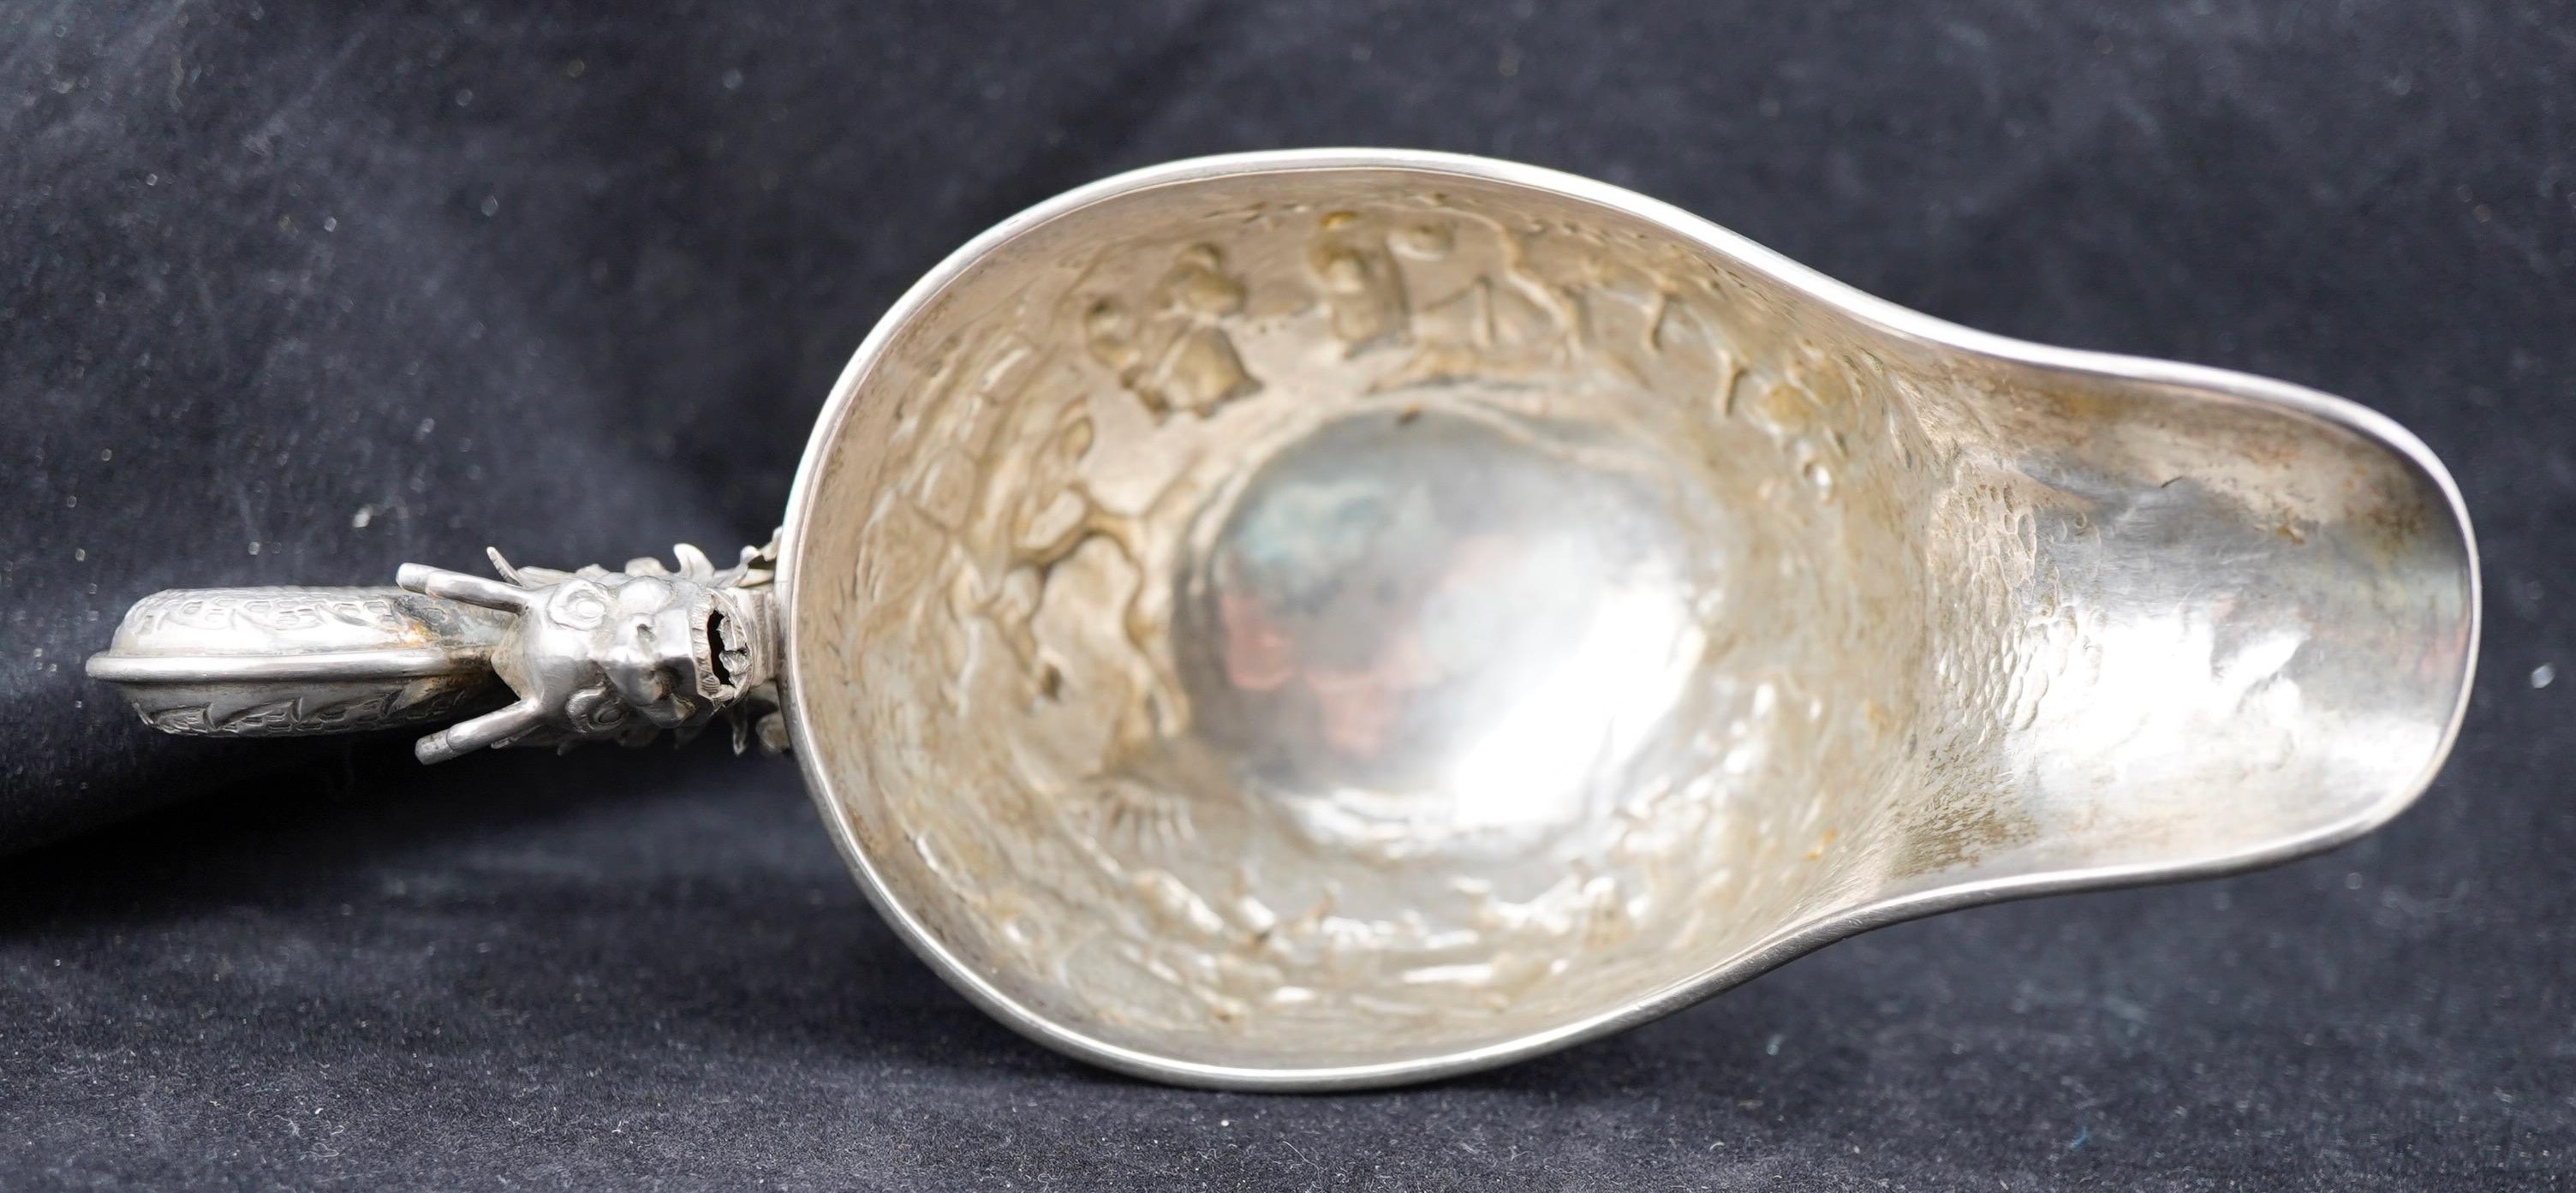 Chinese Silver Repousse Dragon Handle Sauce Boat by Luen Wo In Excellent Condition For Sale In Gainesville, FL